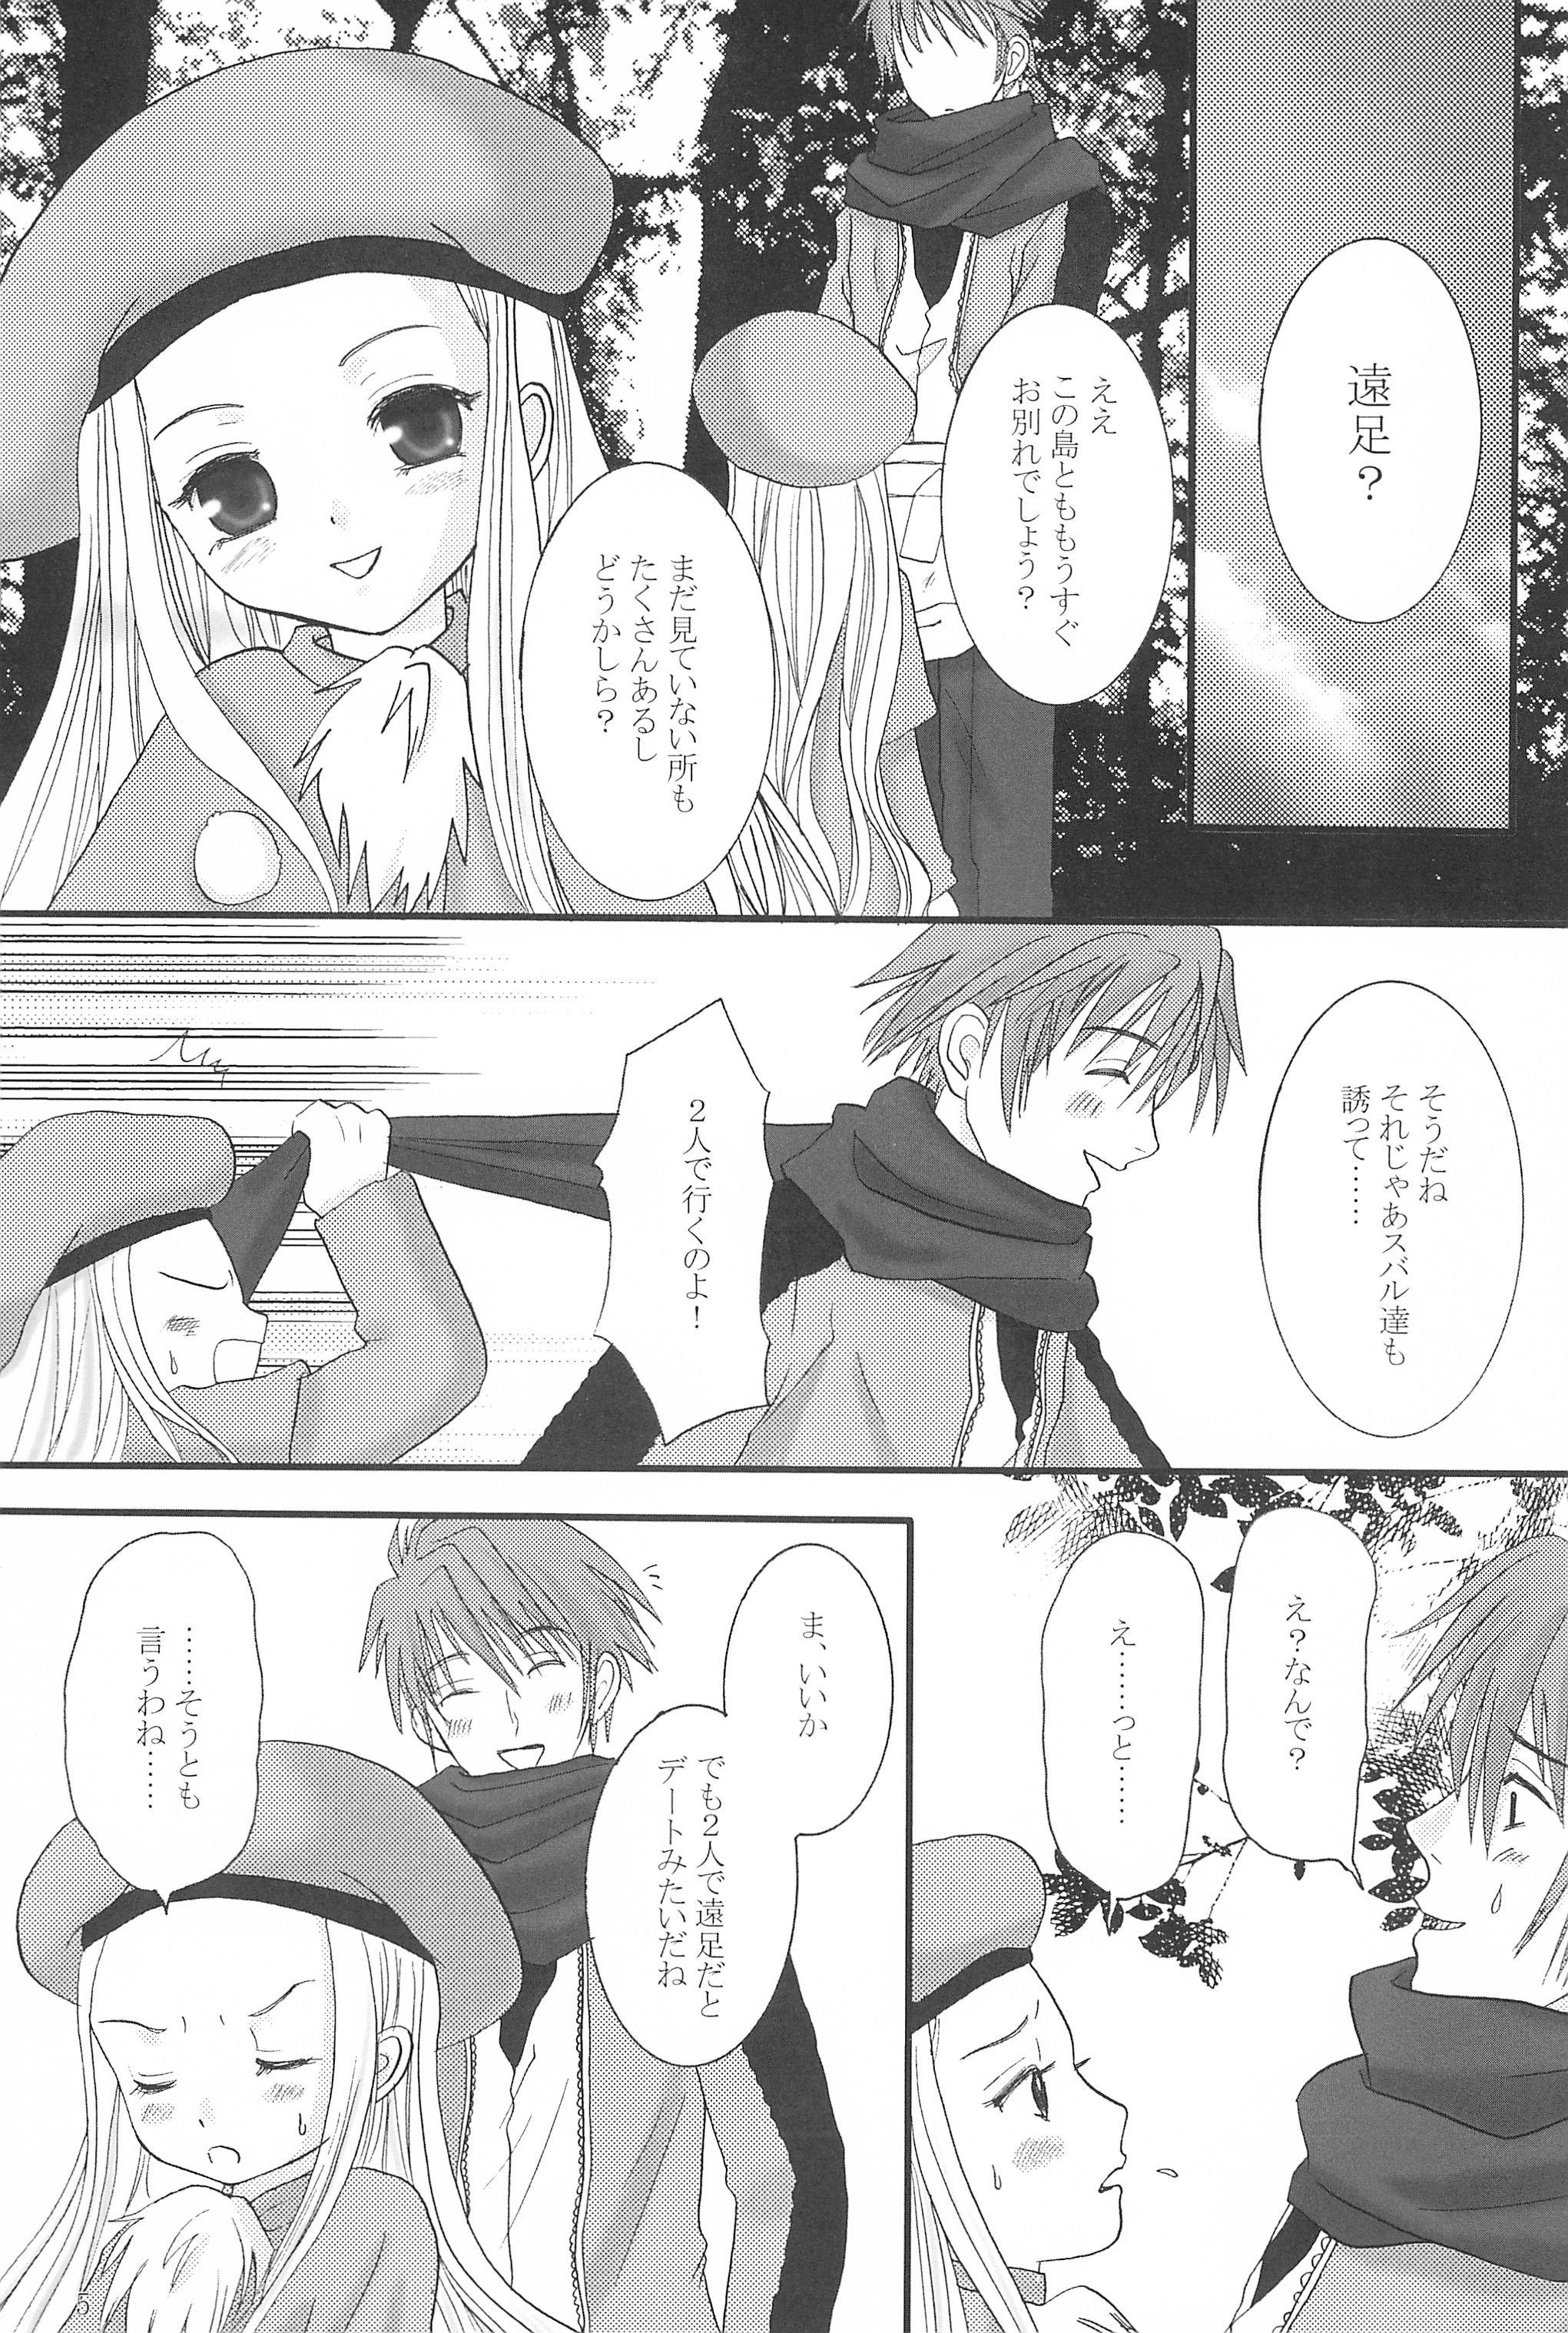 Mexicano MY SWEET STRAWBERRY - Summon night Porn Blow Jobs - Page 5